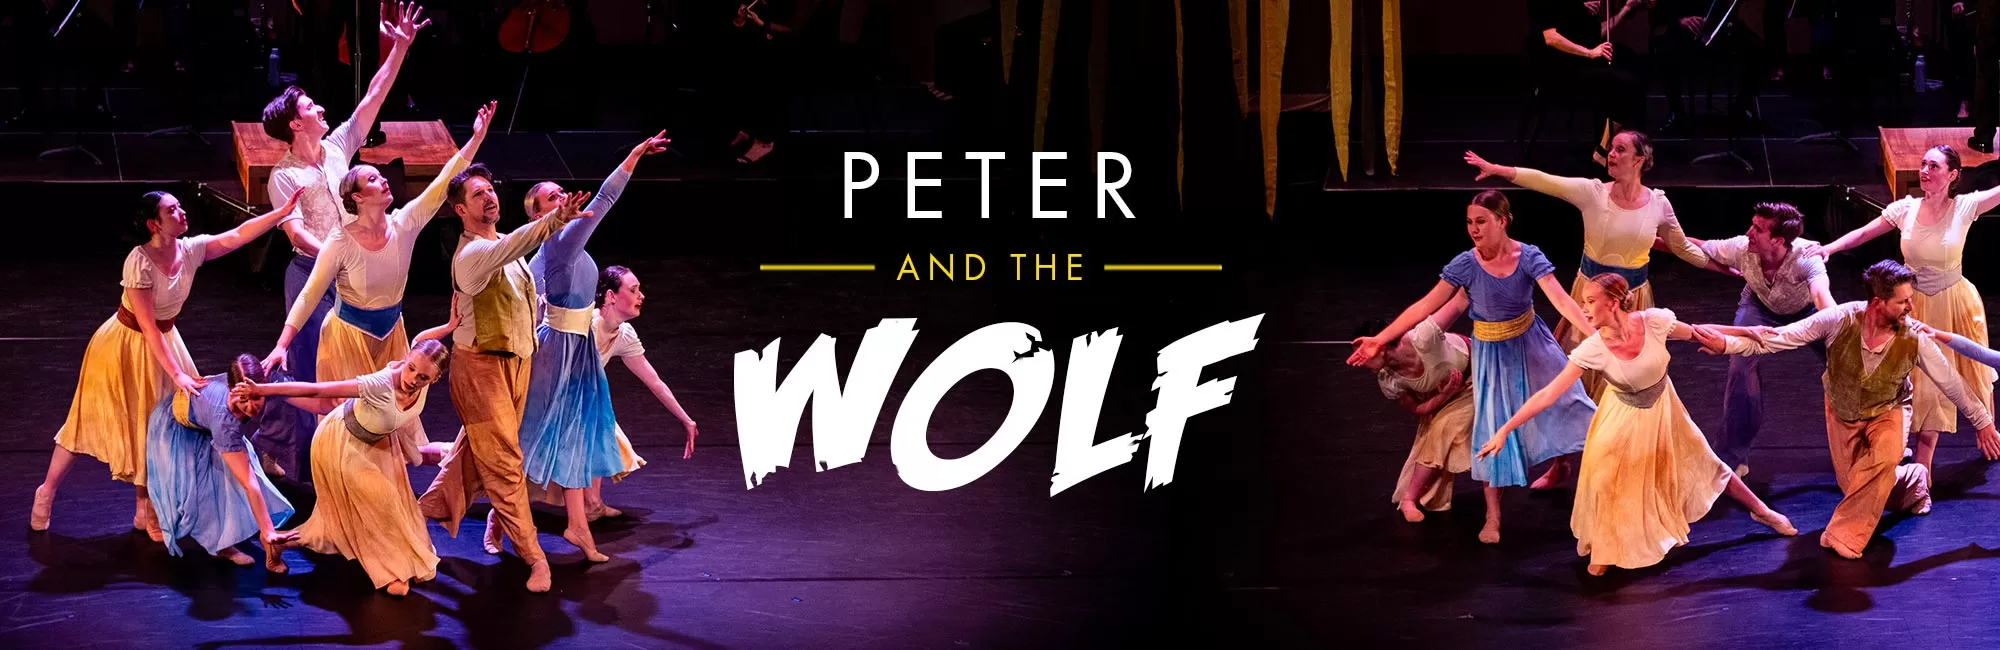 Family Concert - Peter and the Wolf